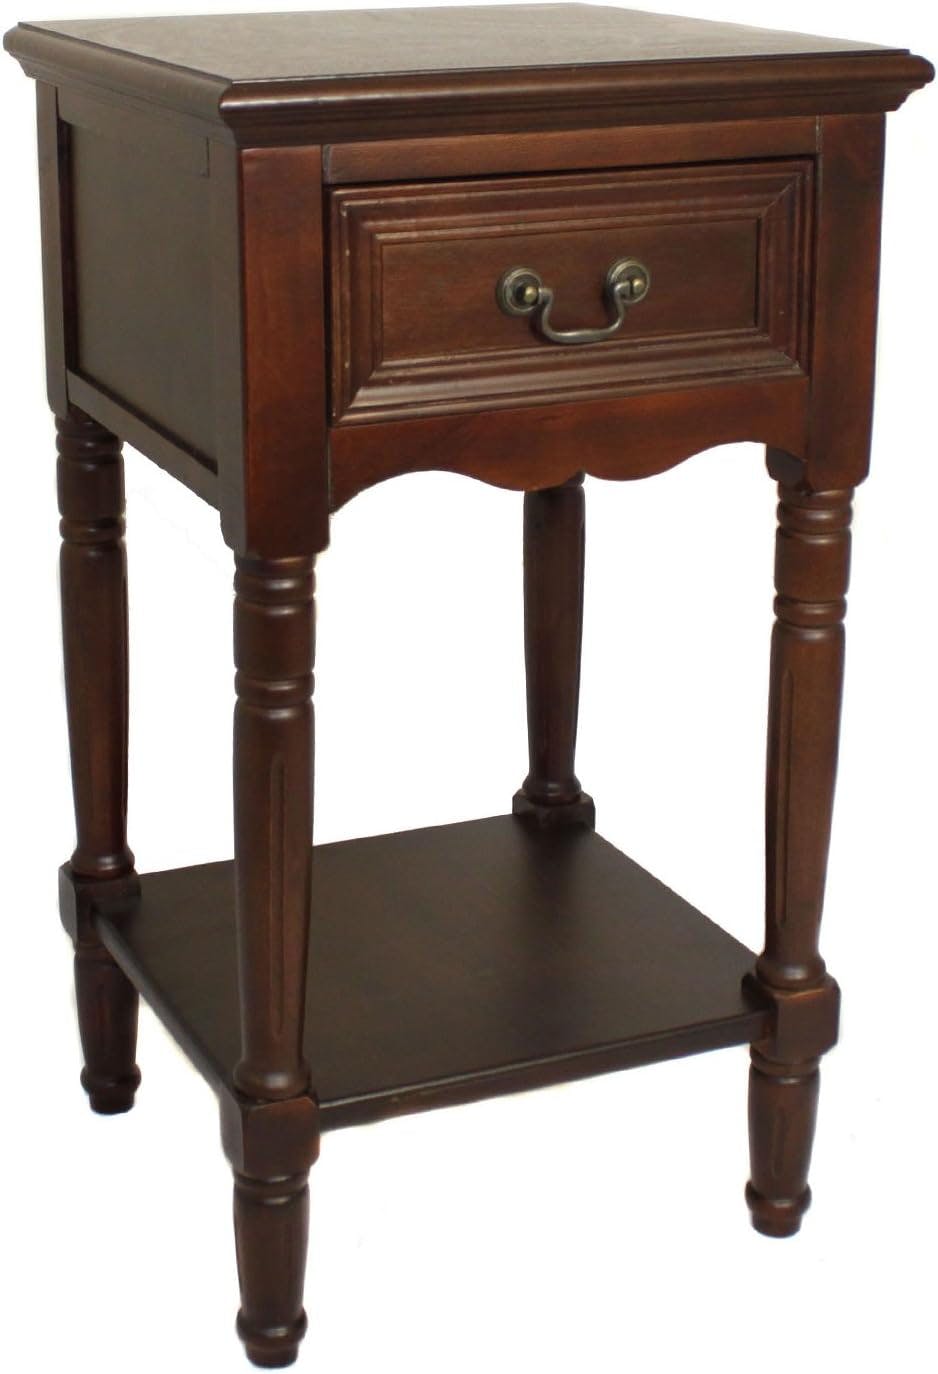 Antiqued Dark Brown Solid Wood Nightstand with 1 Drawer